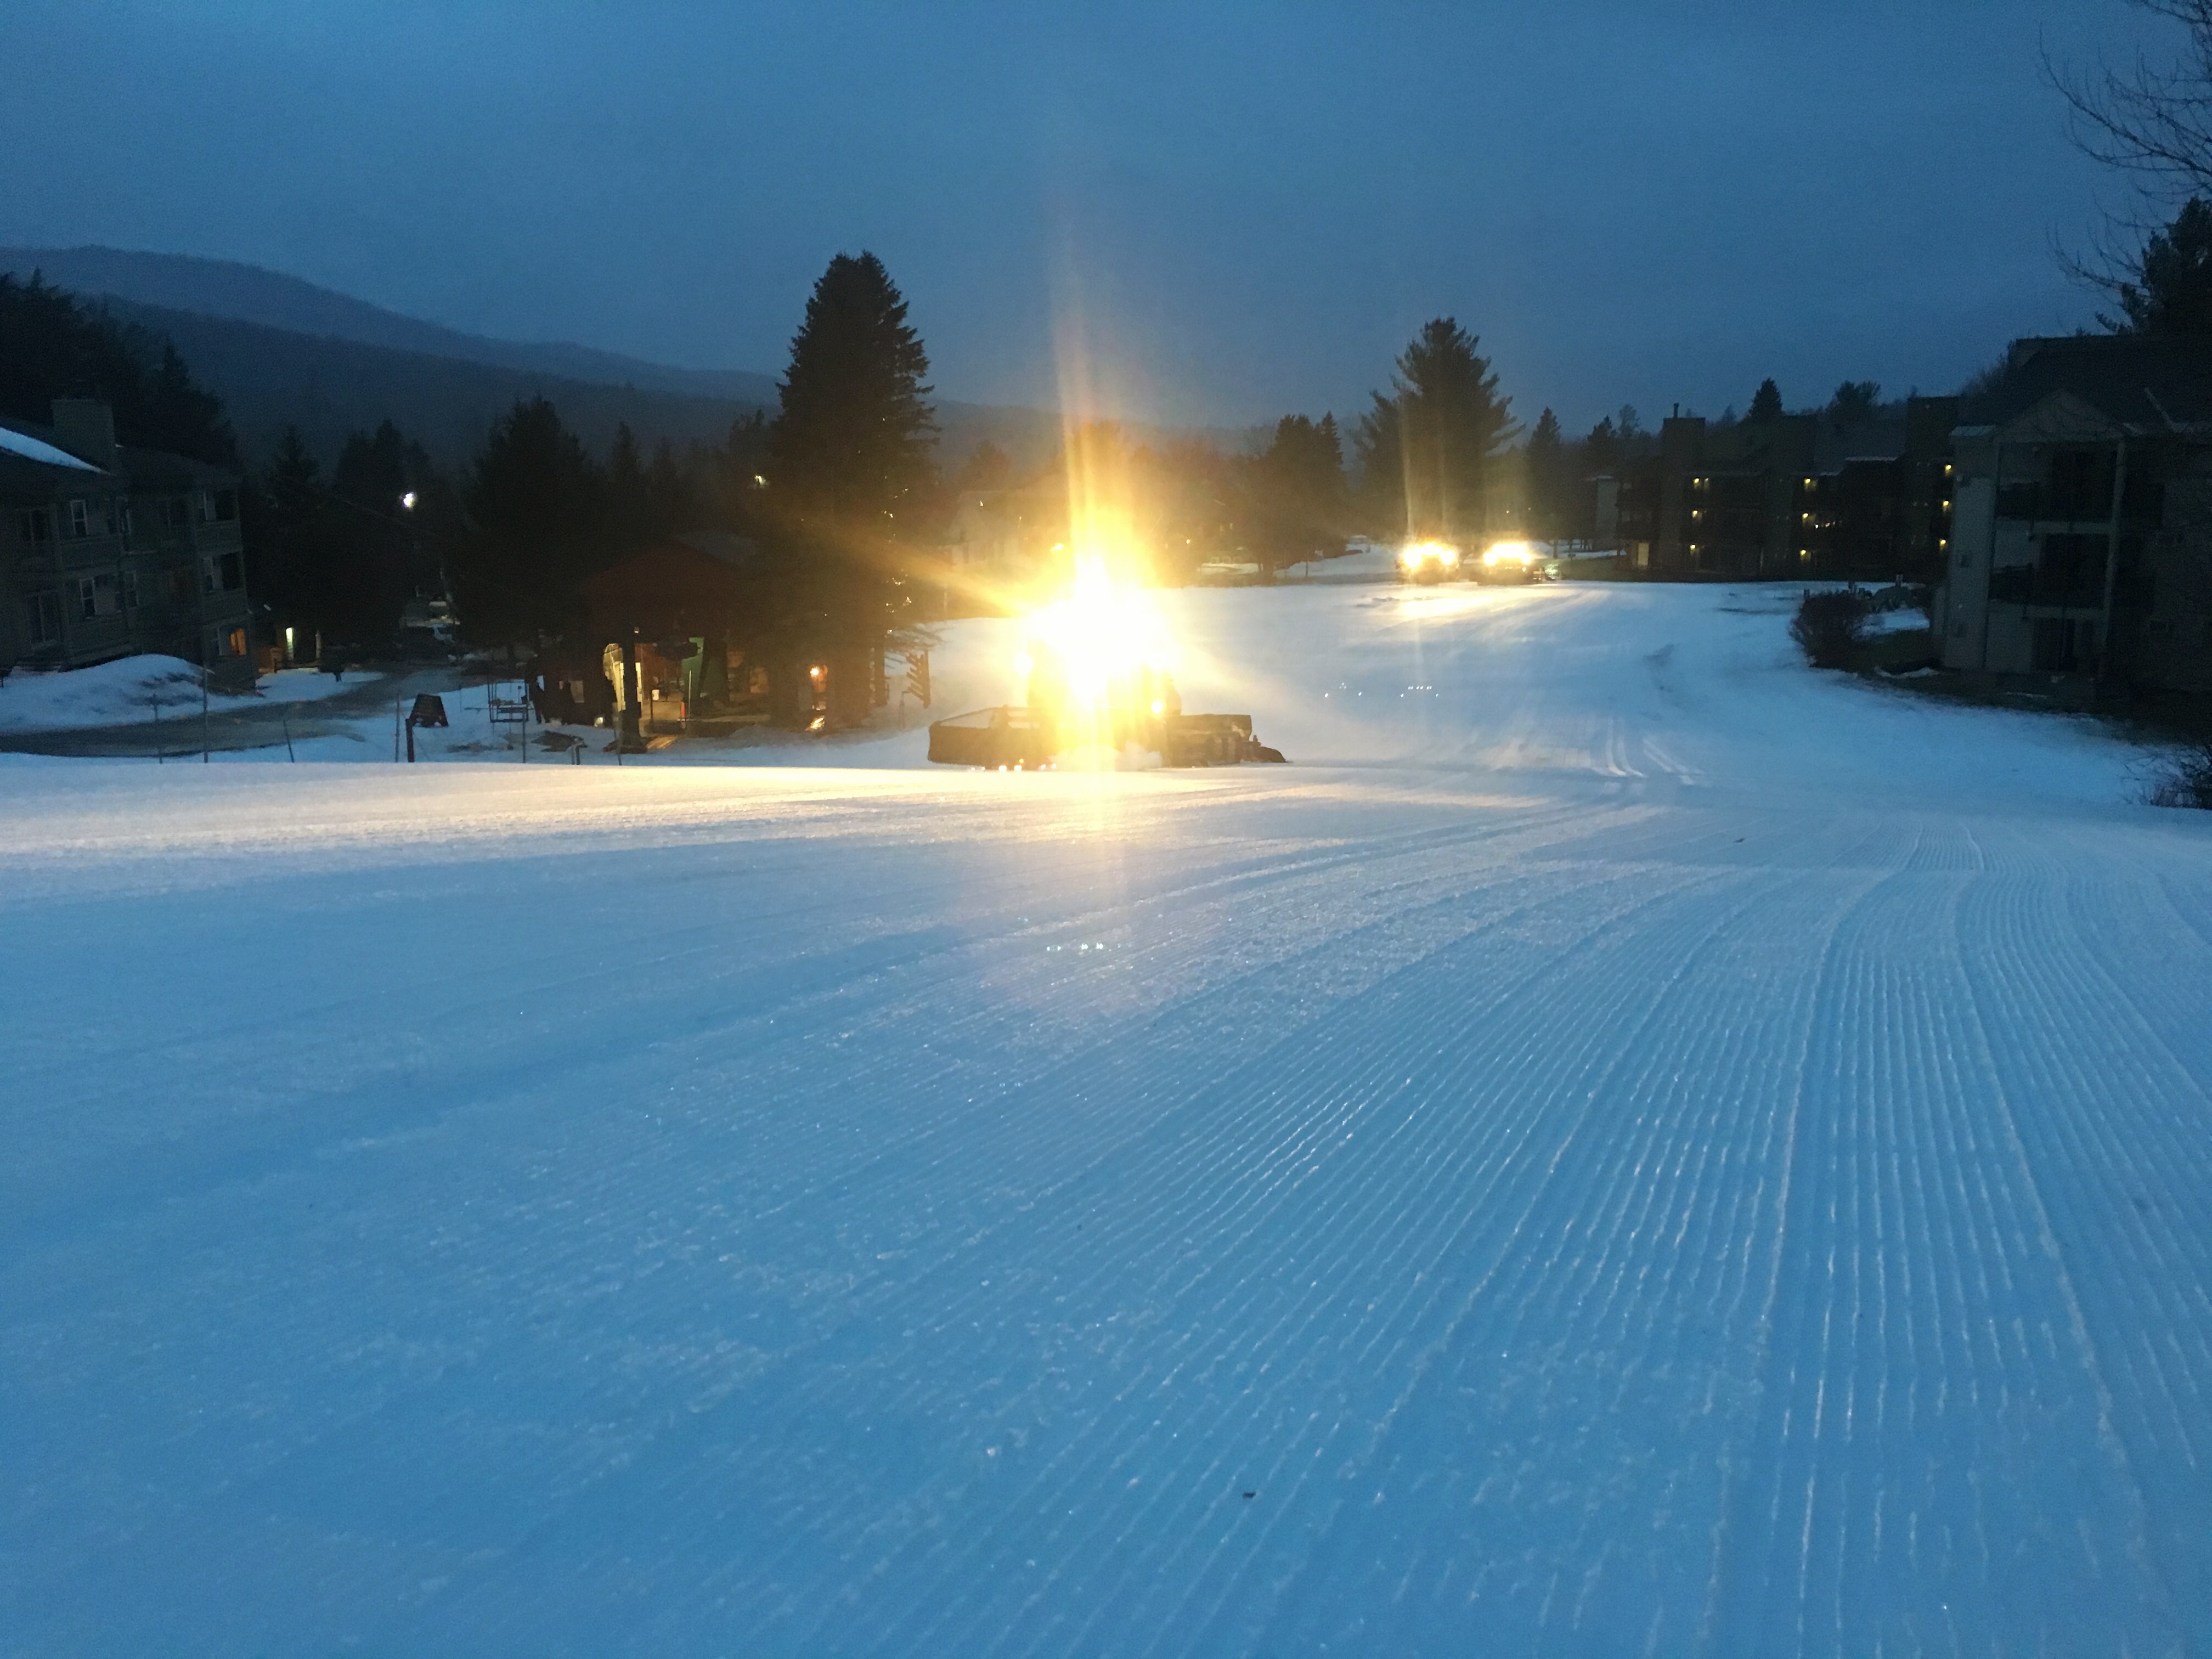 By the Light of the Groomers January 12, 2017